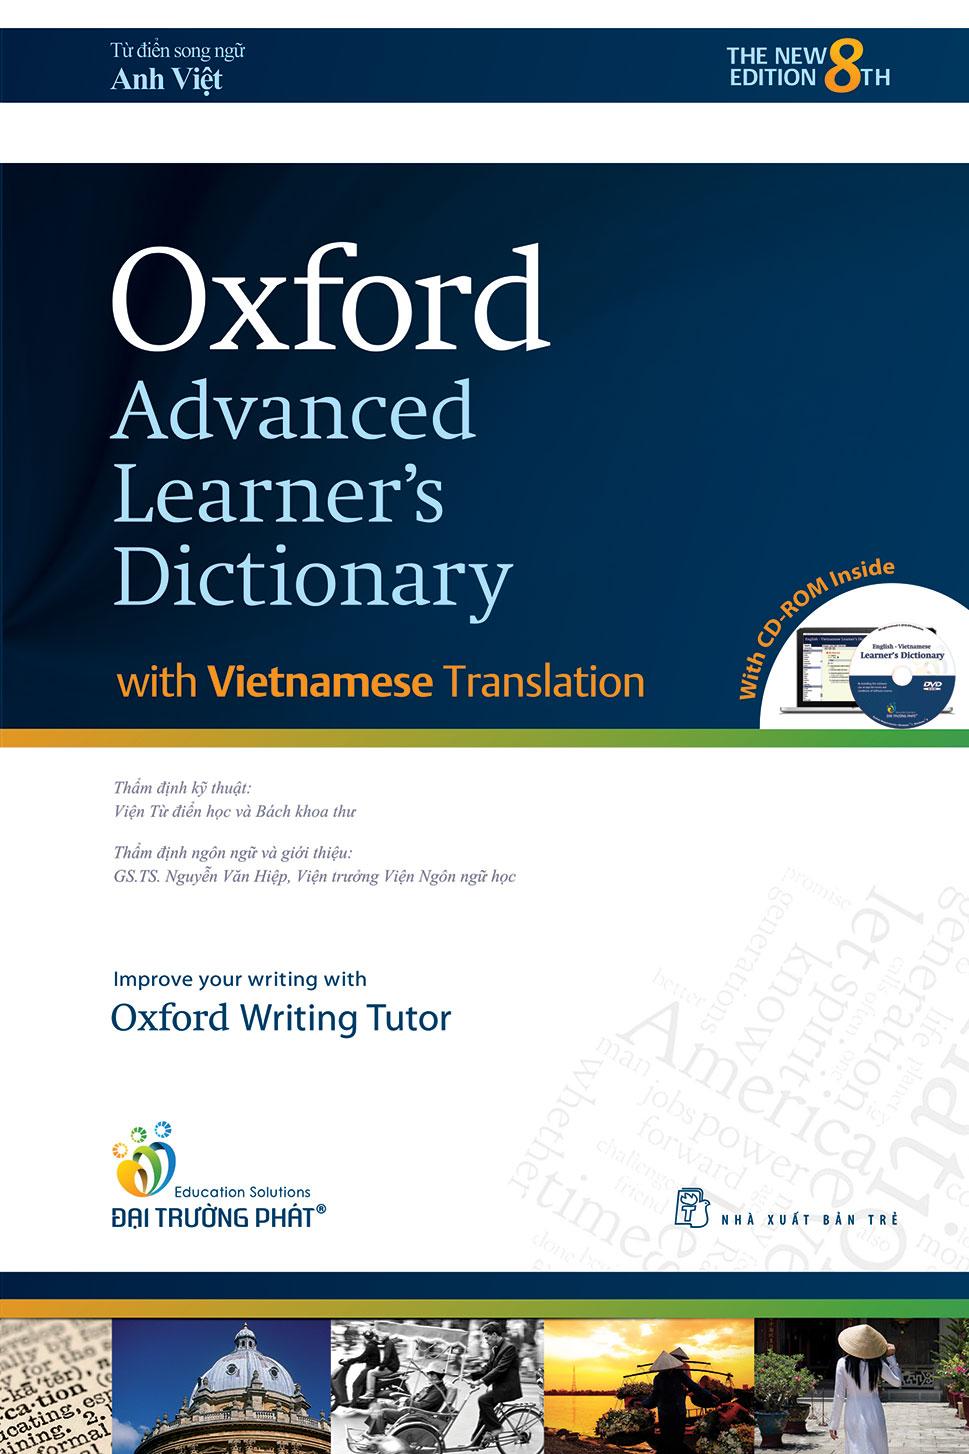 Oxford Advanced Learner's Dictionary 8th with Vietnamese Translation (PB)